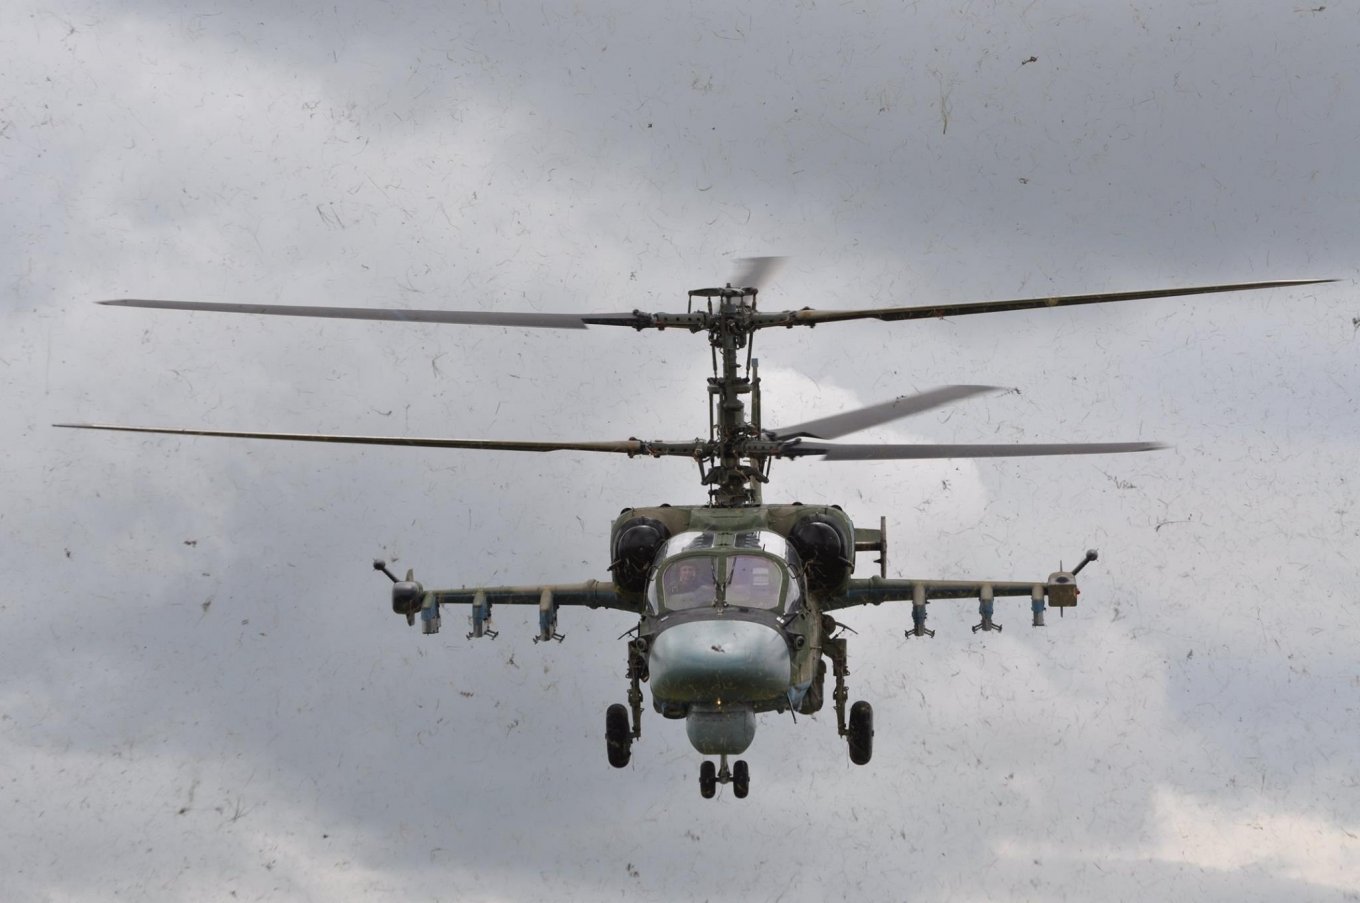 russia's Ka-52, Stugna-P anti-tank missile system manufactured by Luch Design Bureau already deserves to be called anti-helicopter missle system”, Defense Express